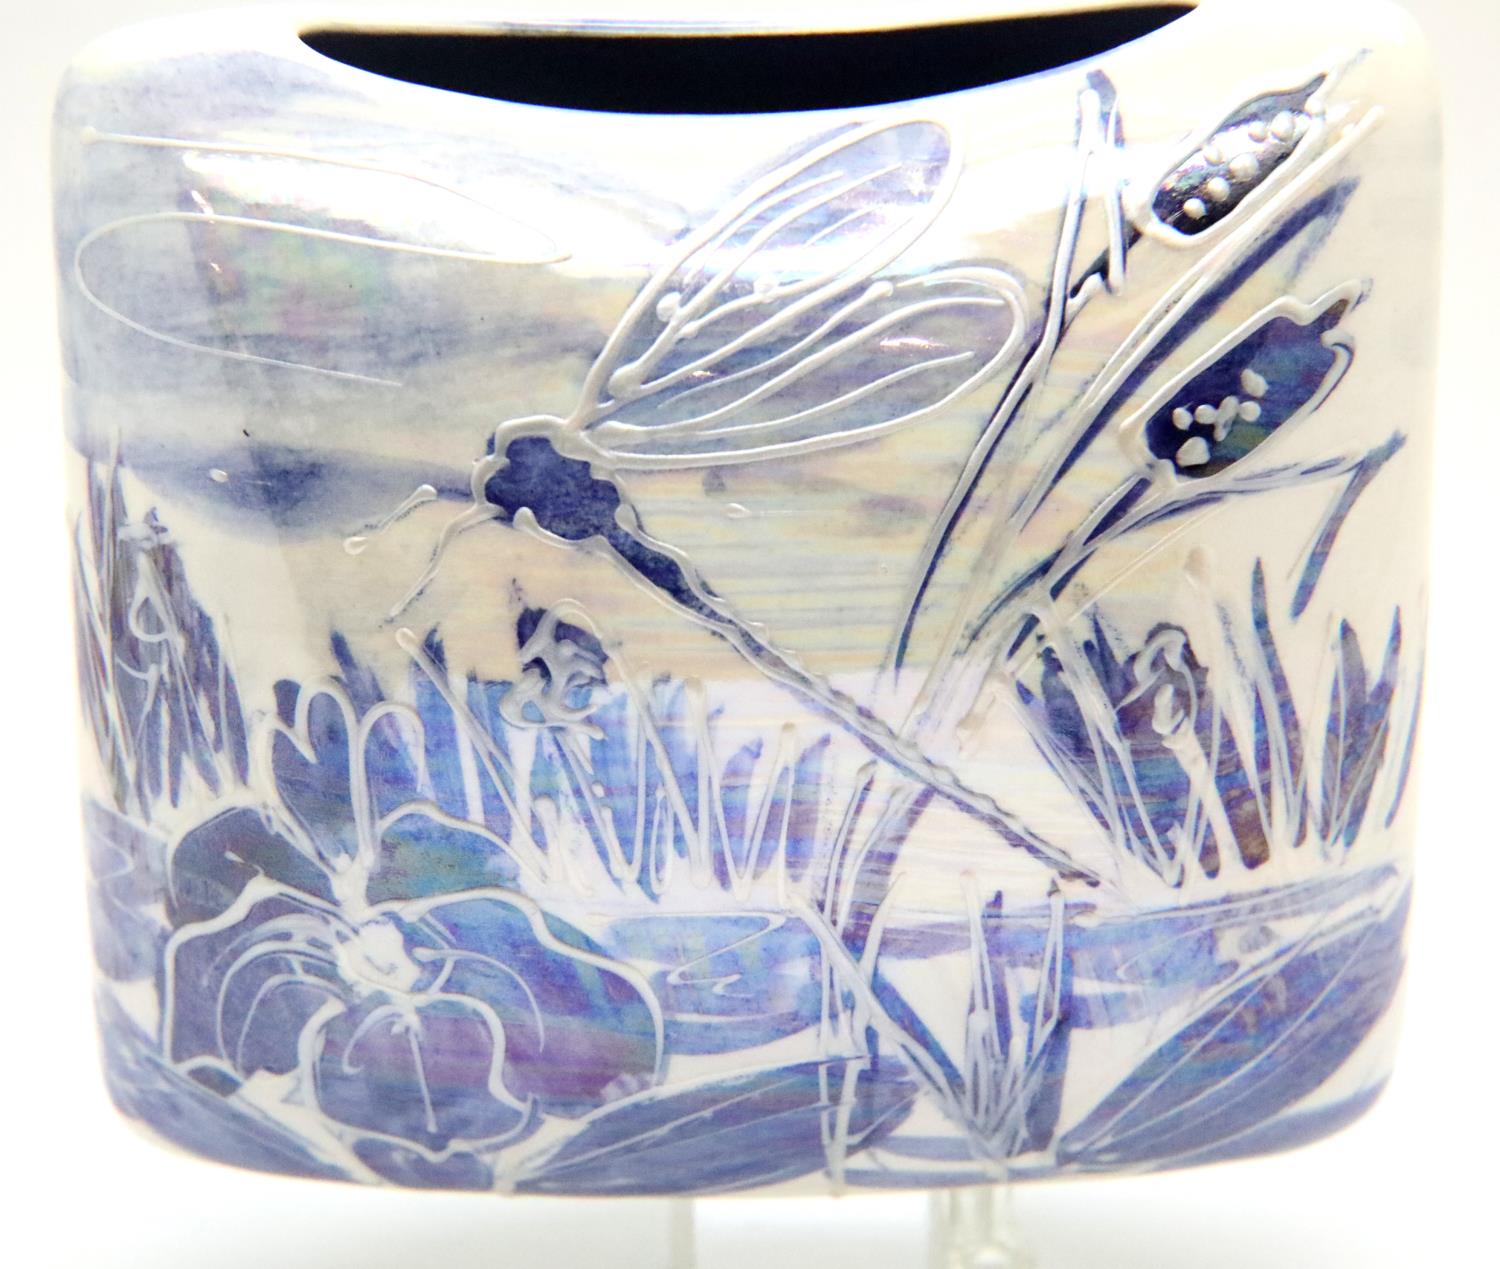 Anita Harris Dragonfly vase, H: 11 cm. P&P Group 1 (£14+VAT for the first lot and £1+VAT for